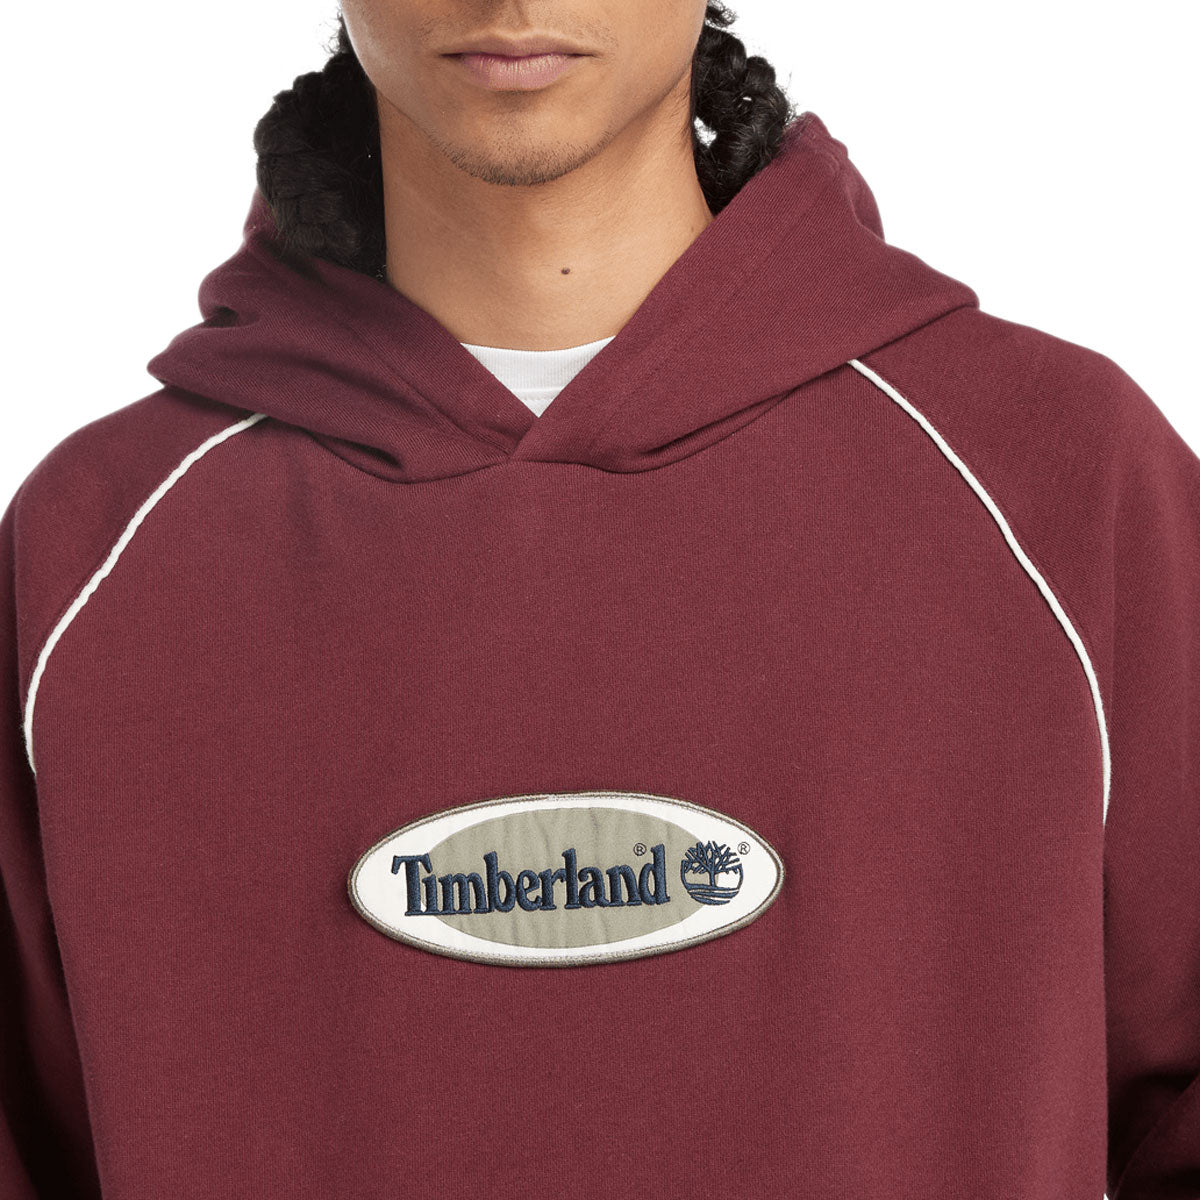 Timberland Oval Logo Patch Hoodie - Port Royale image 3